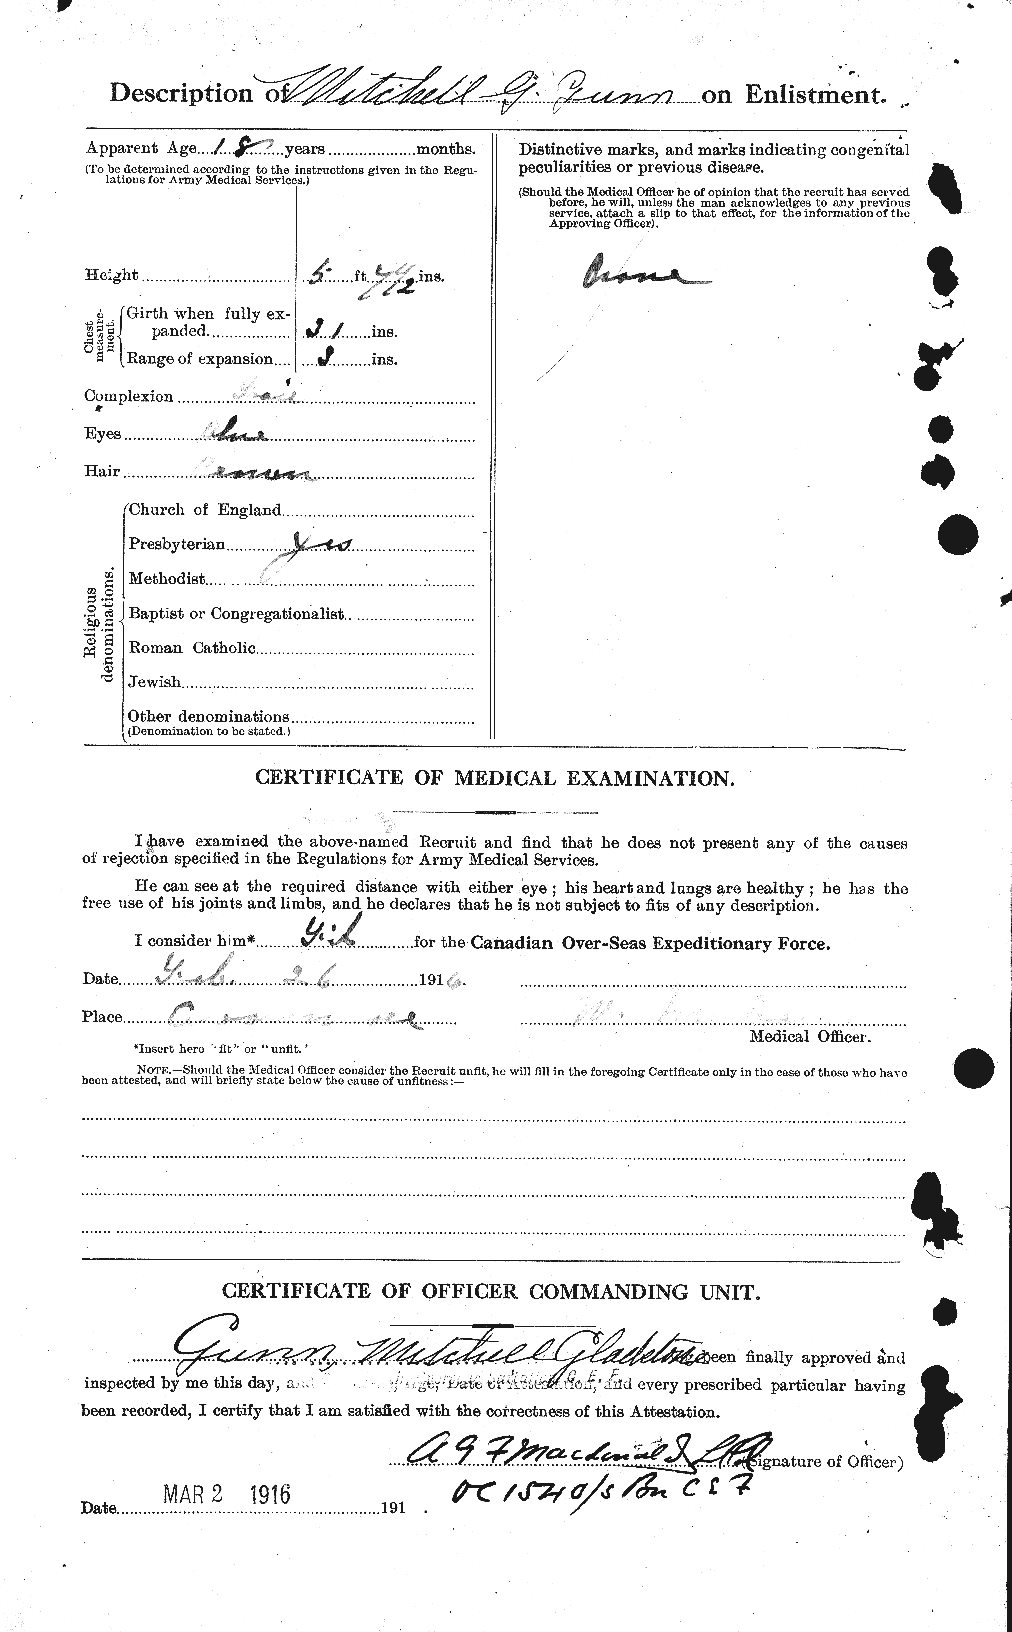 Personnel Records of the First World War - CEF 369247b